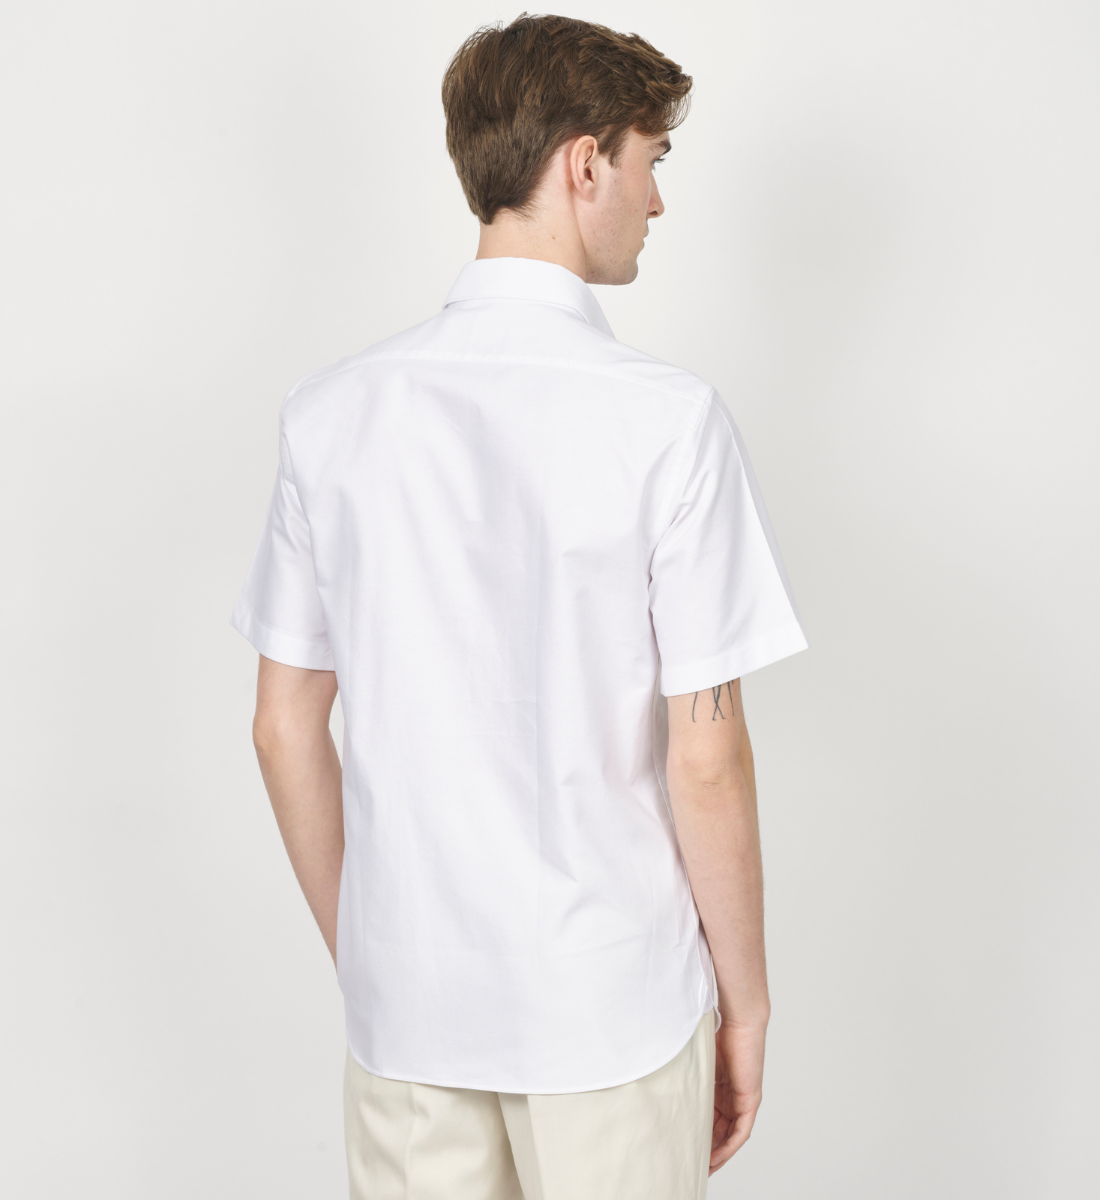 Chemise oxford blanche coupe droite manches courtes